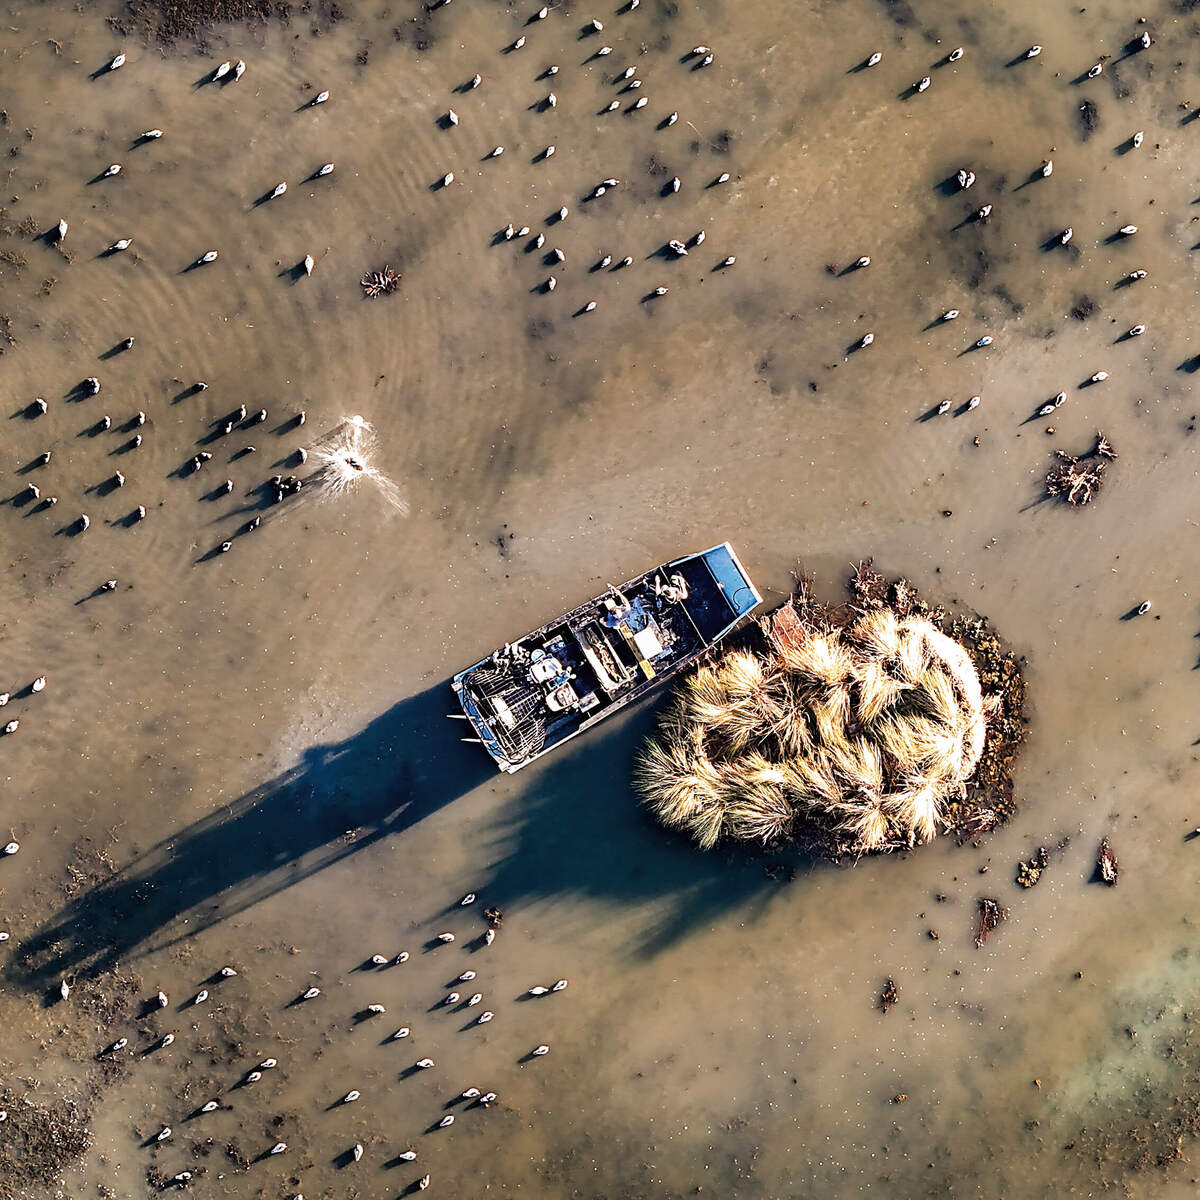 Drone shot of waterfowlers in a boat, accessing their duck blind. Photo by Jay Foster